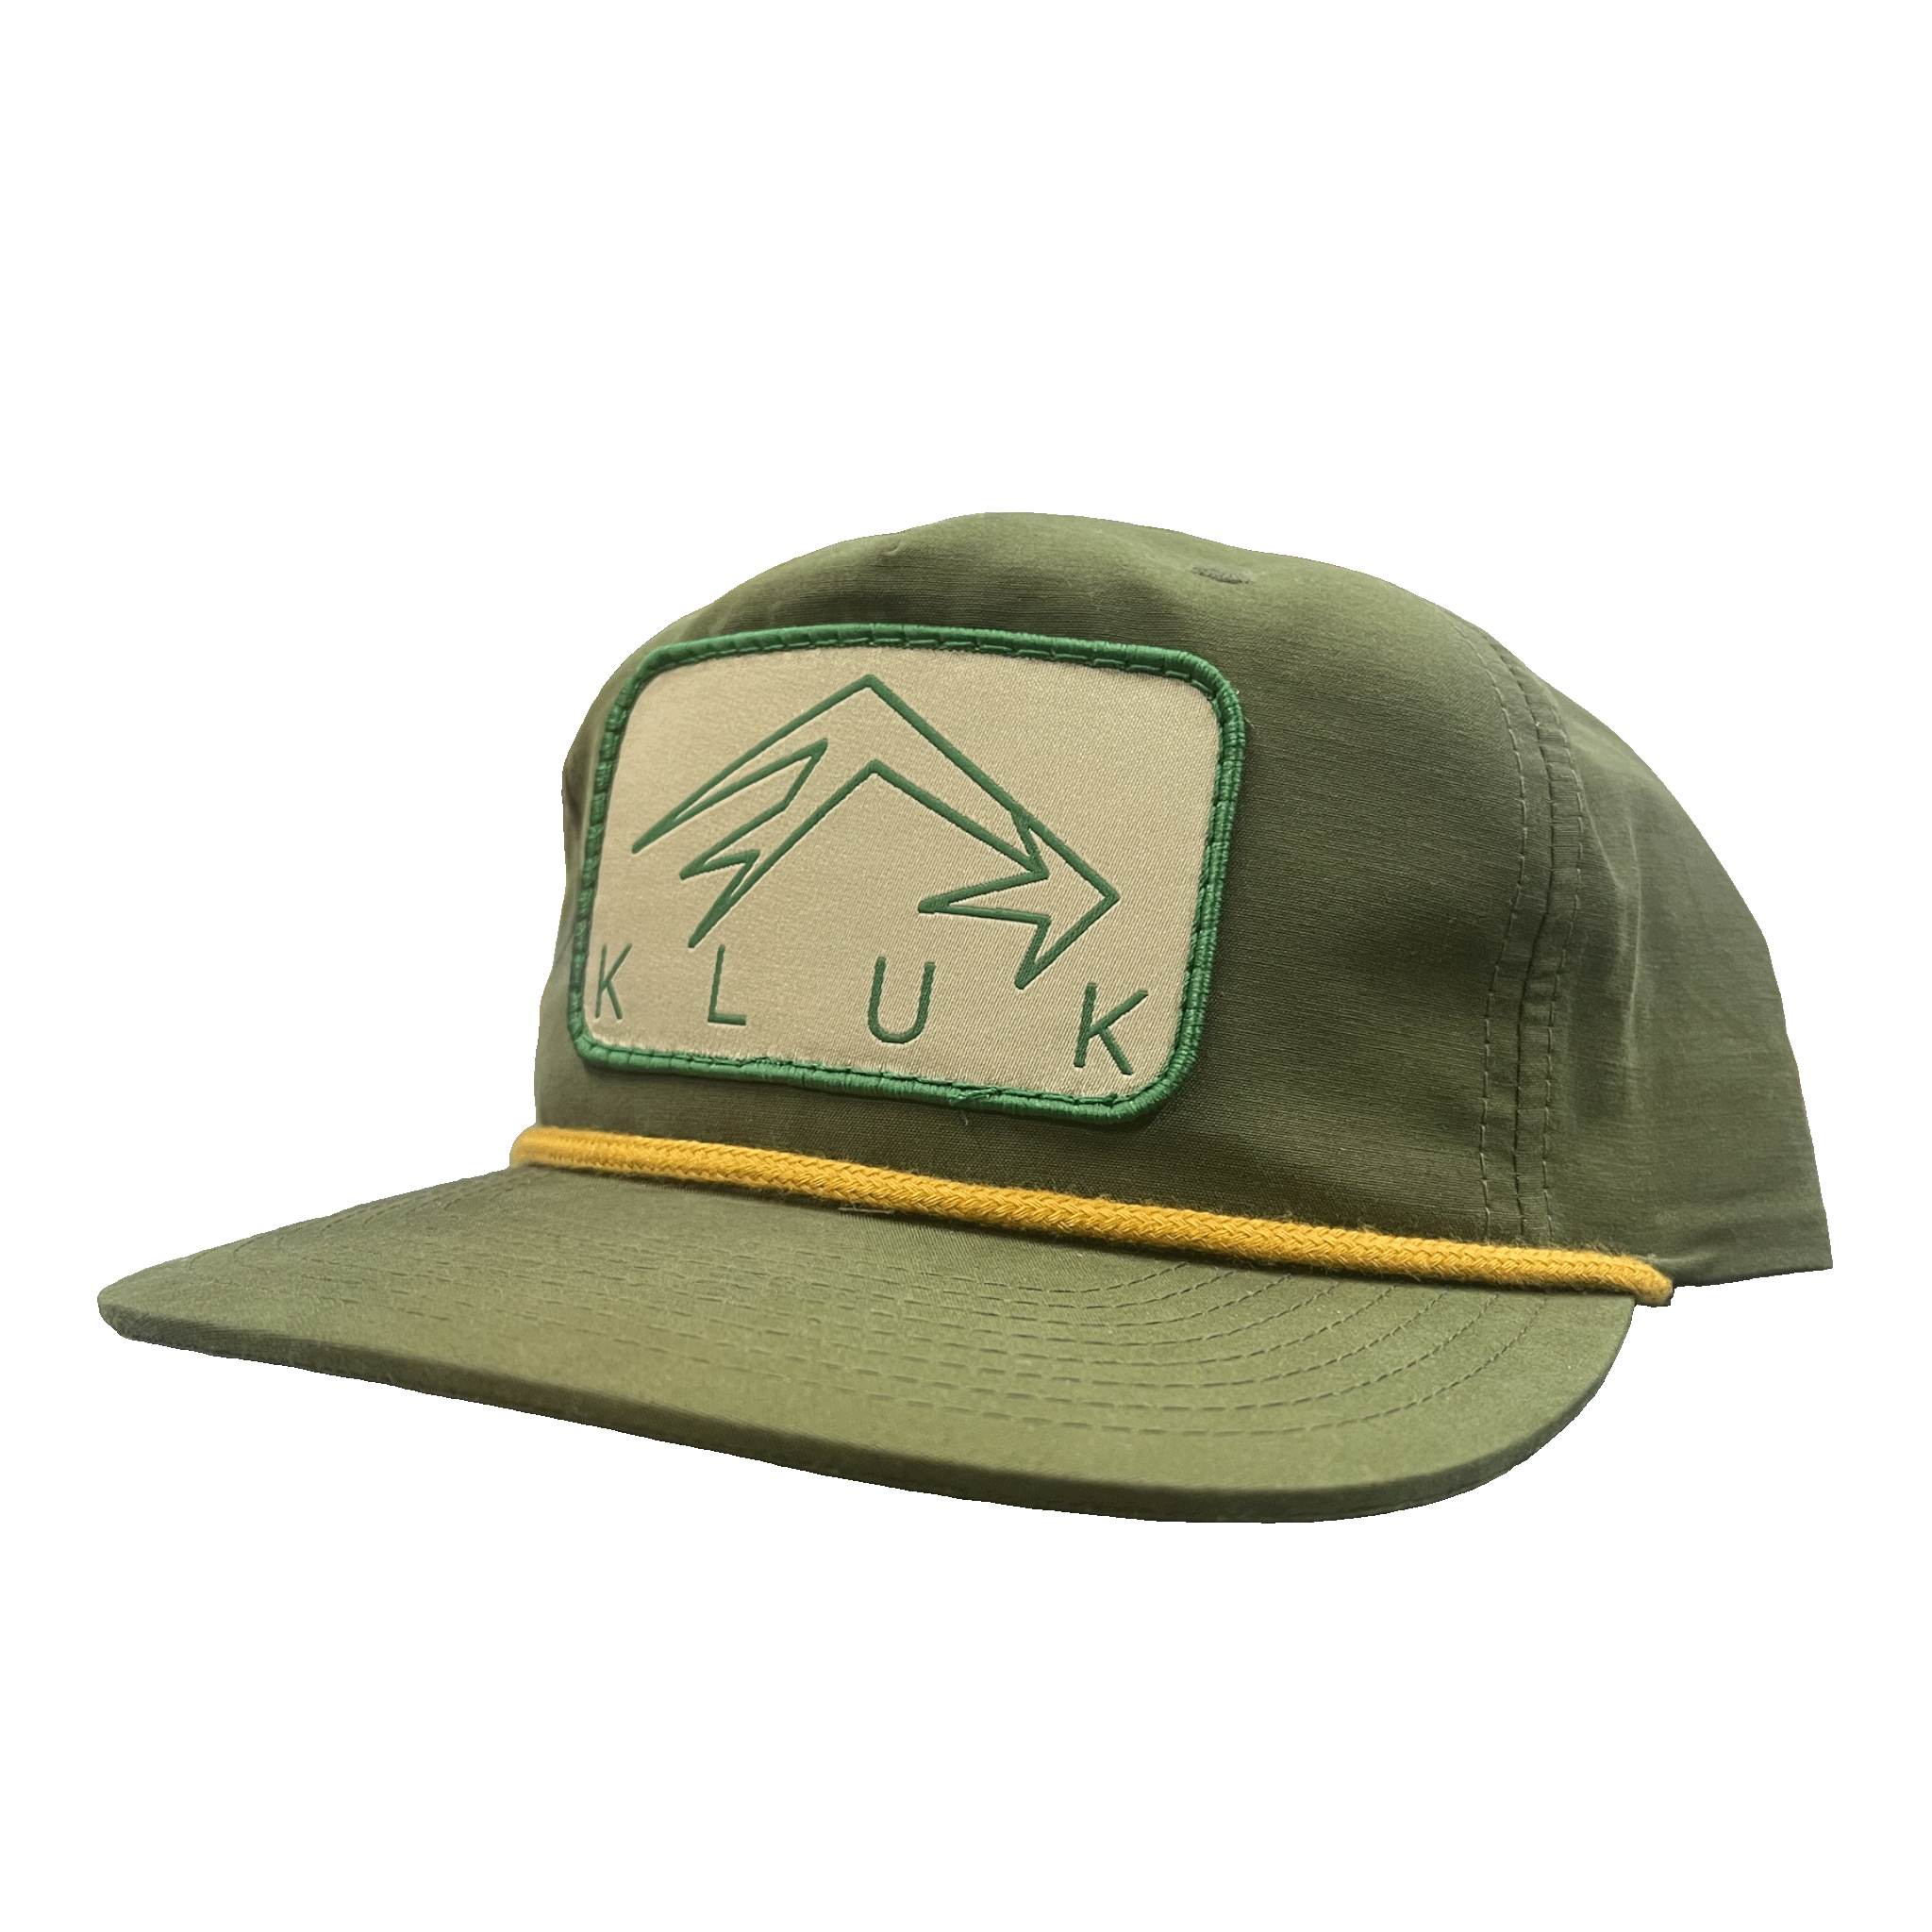 The Loden Gold Pap hat Side profile showing off the logo